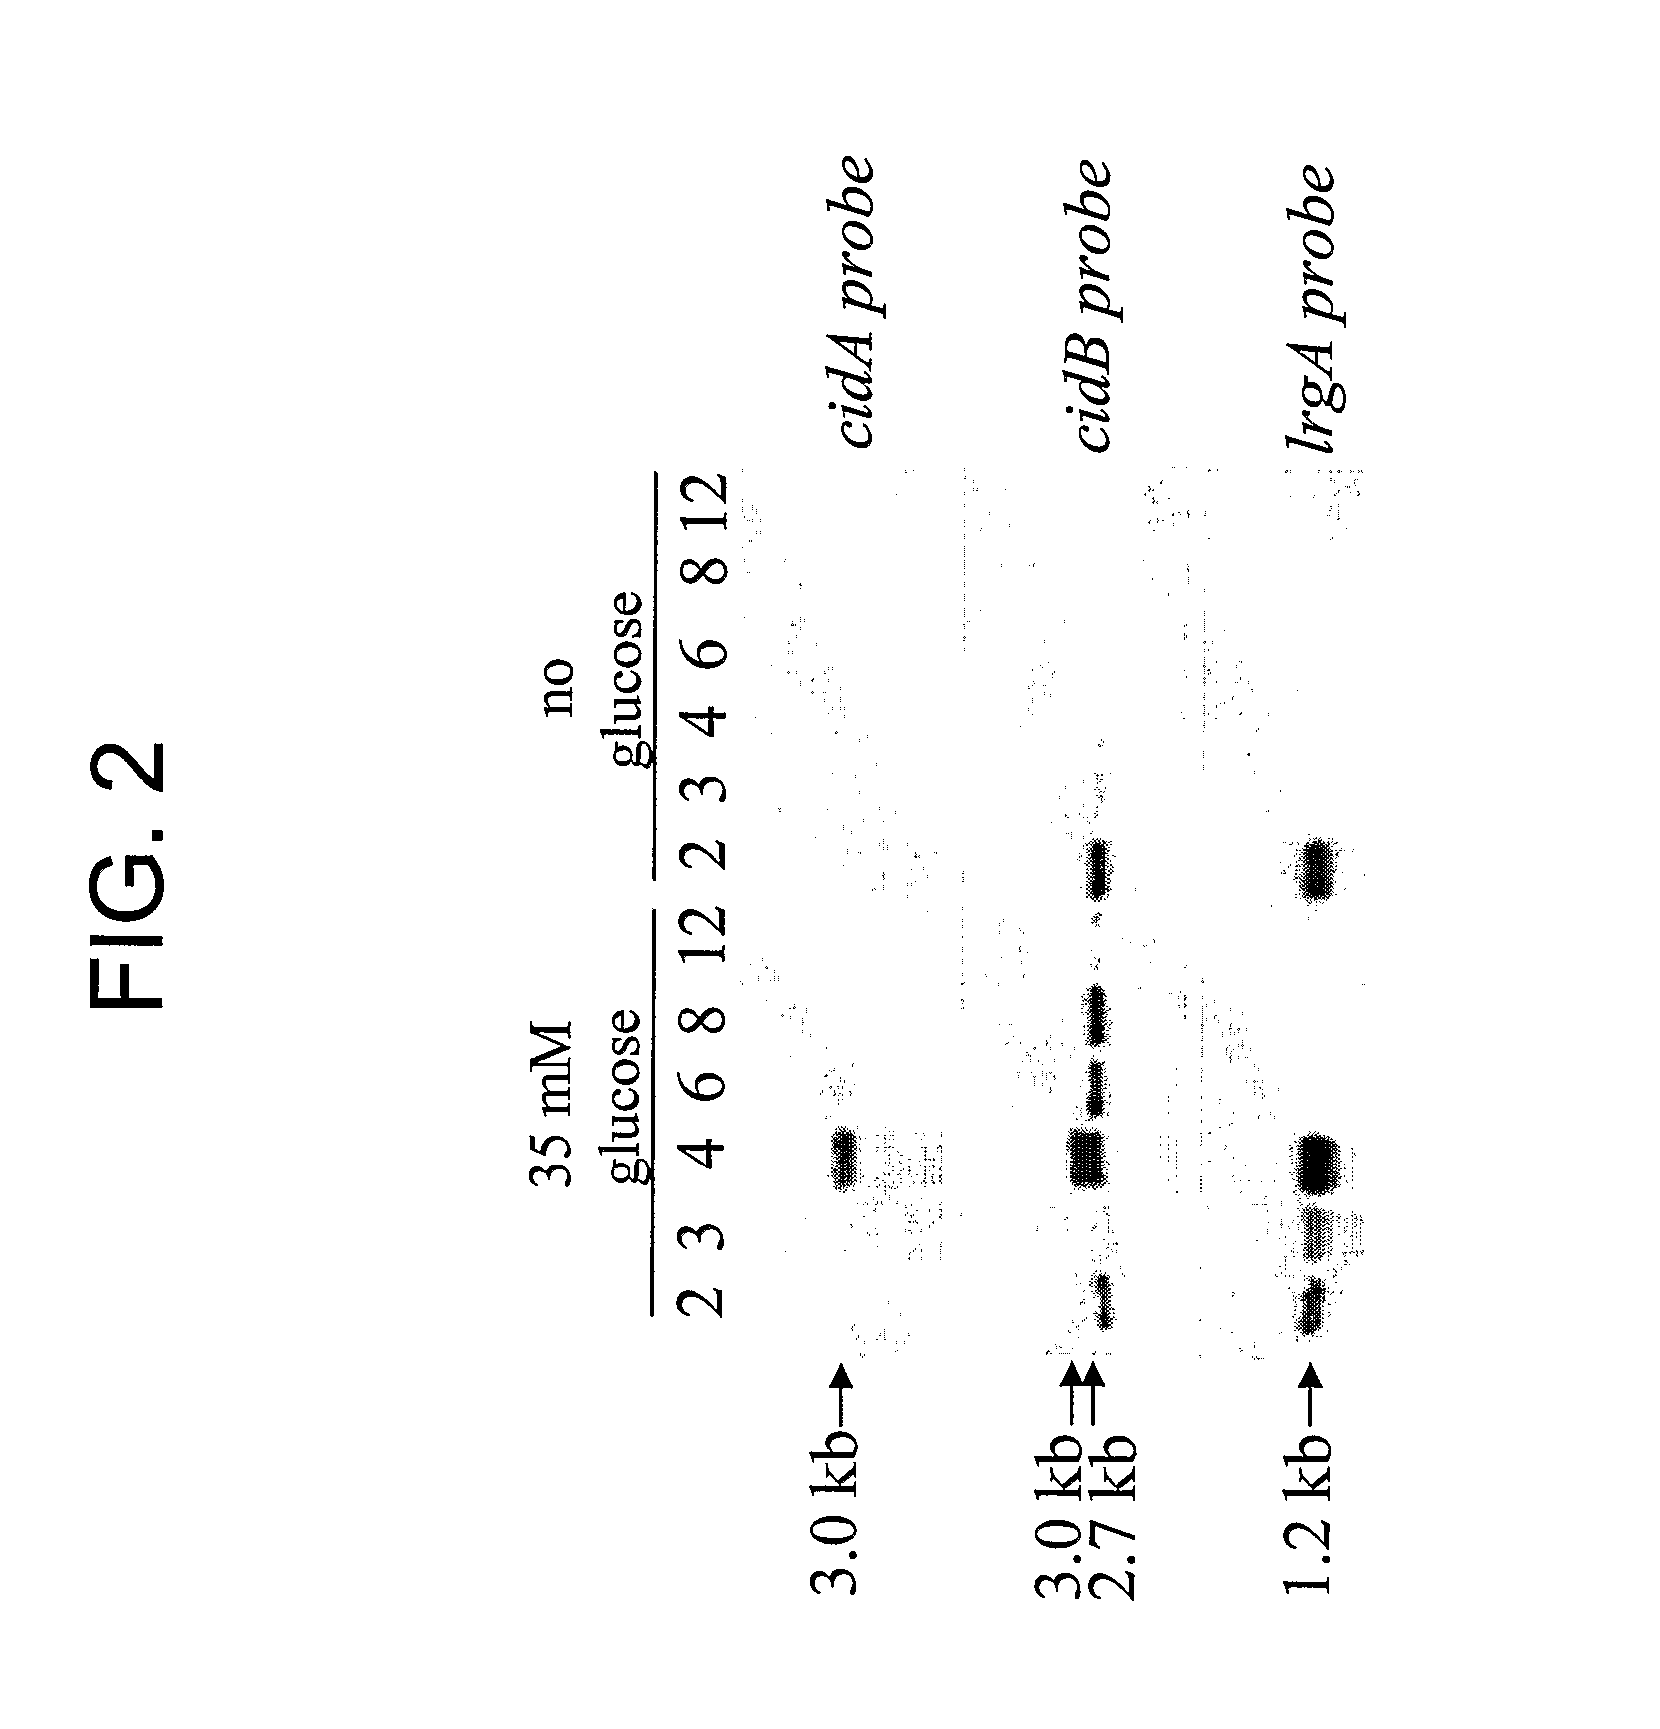 Methods for Altering Acetic Acid Production and Enhancing Cell Death in Bacteria